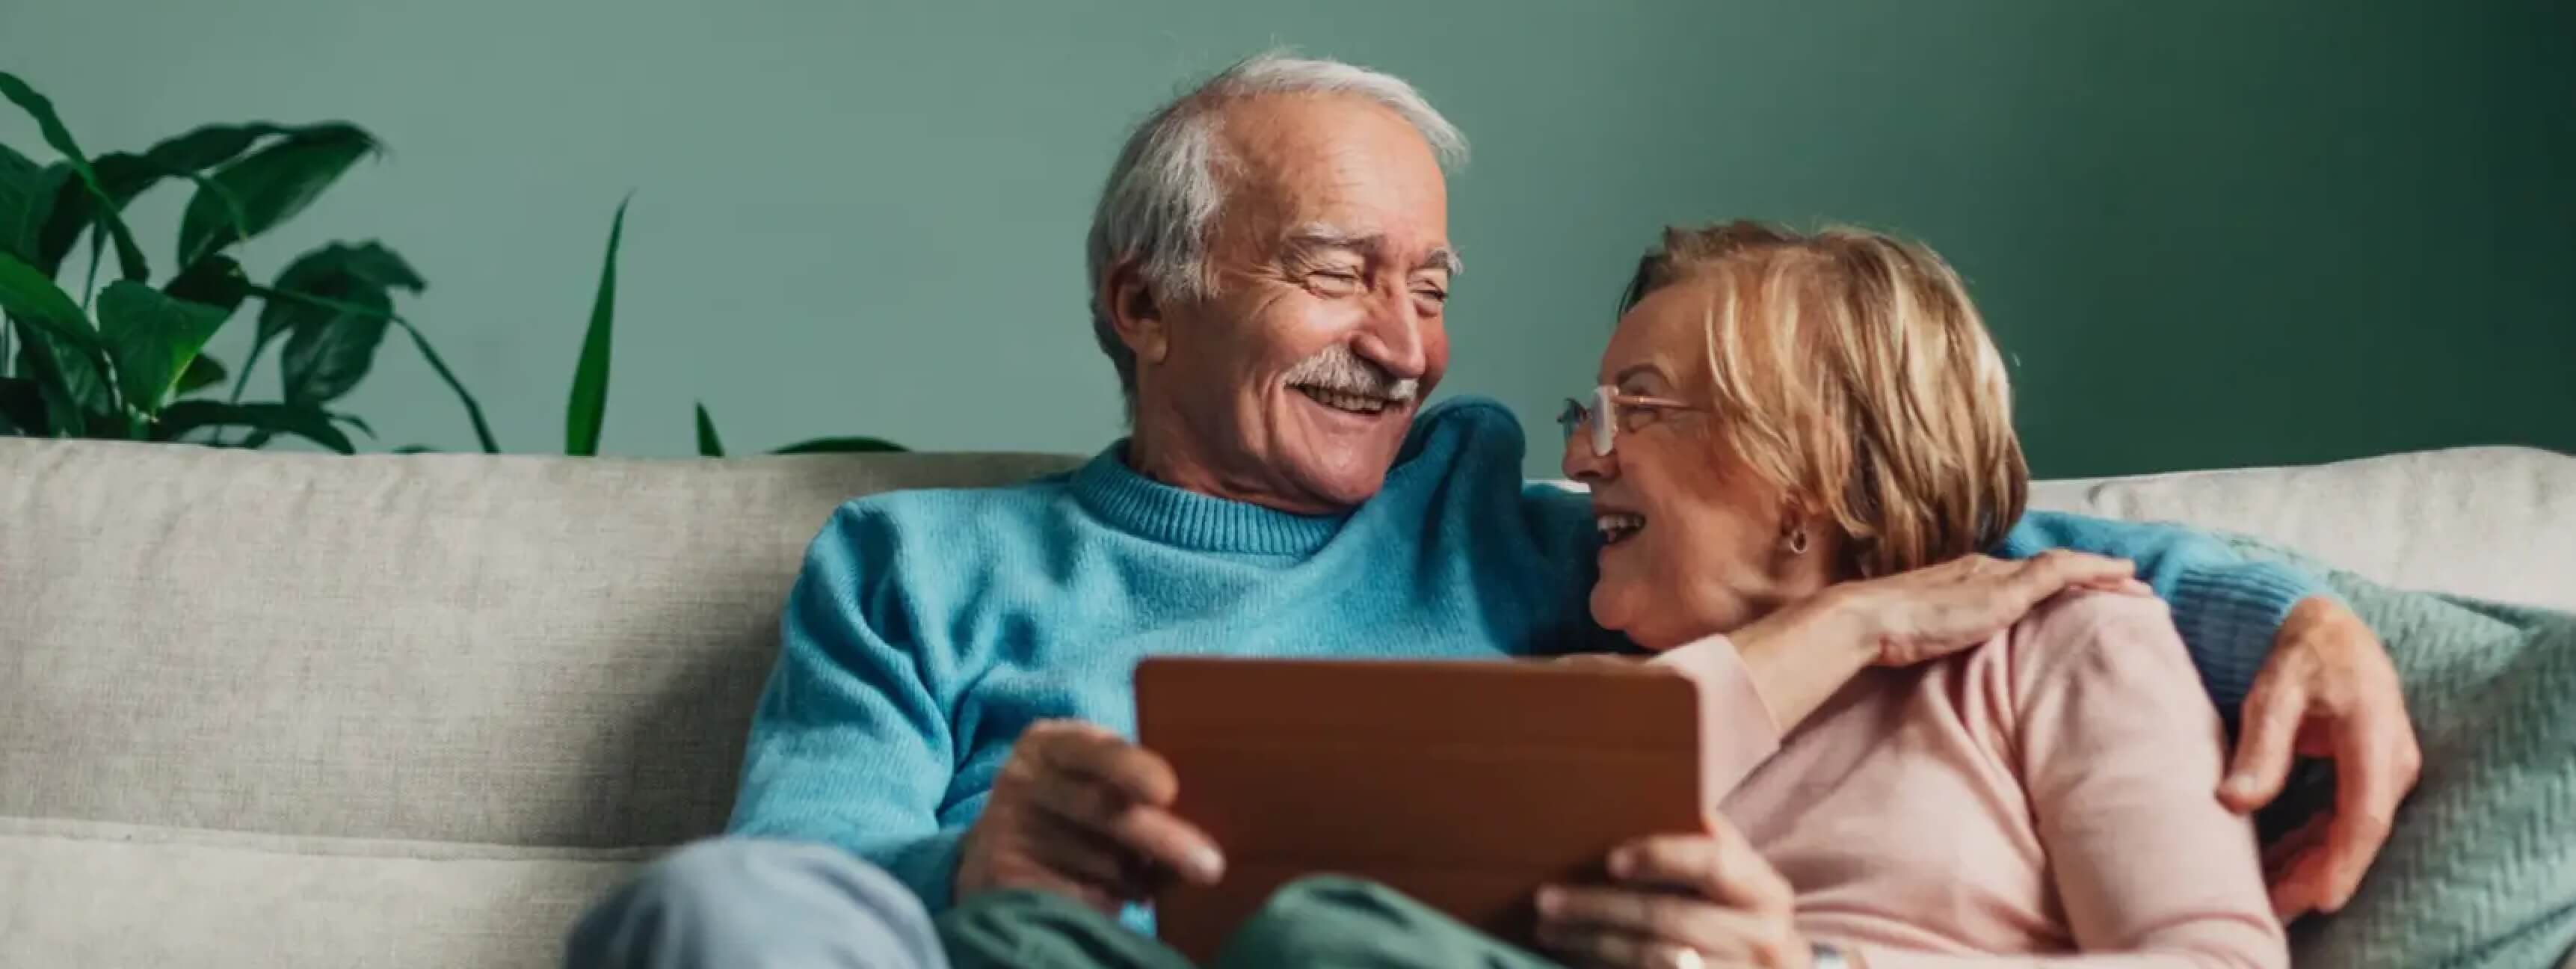 An elderly couple sitting on a sofa smiling at each other whilst holding a digital tablet